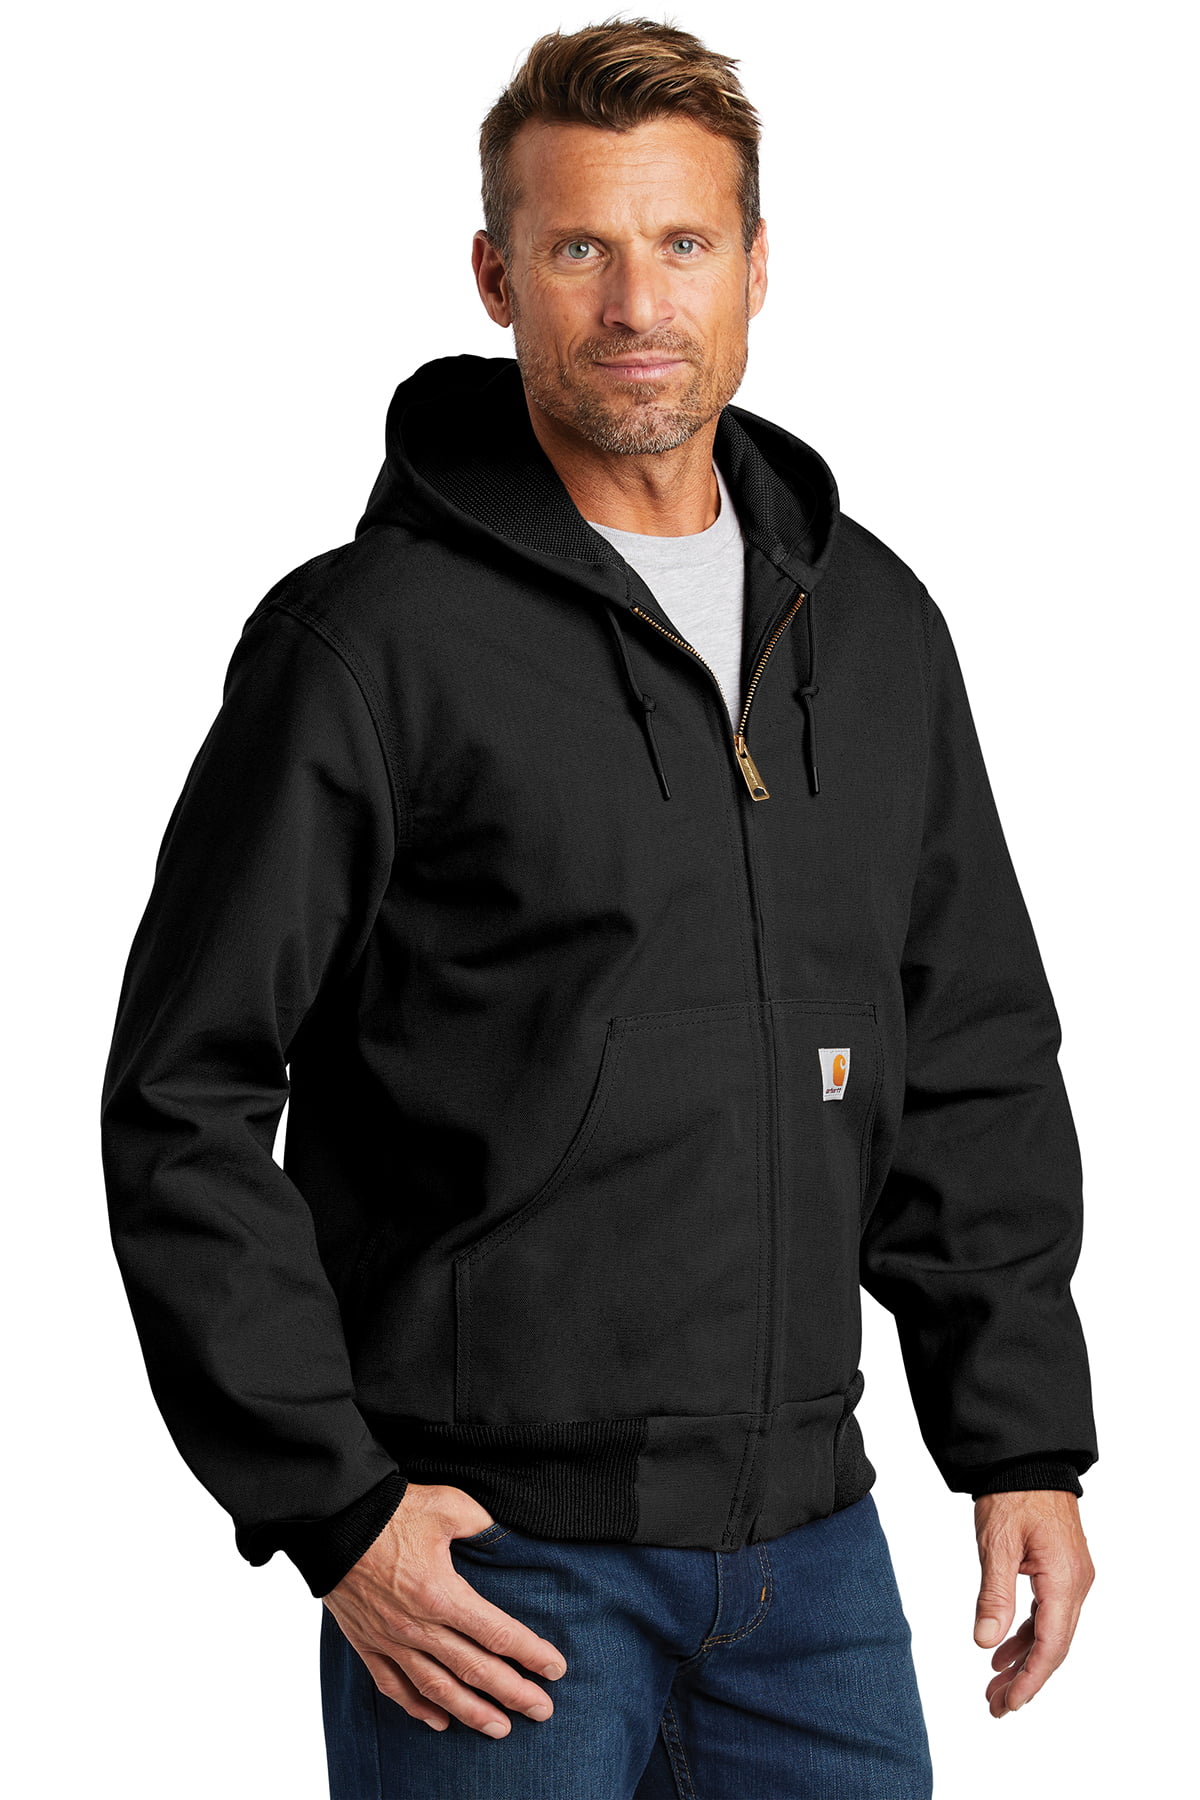 Carhartt Men's J131 Thermal Lined Hooded Duck Active Jacket 